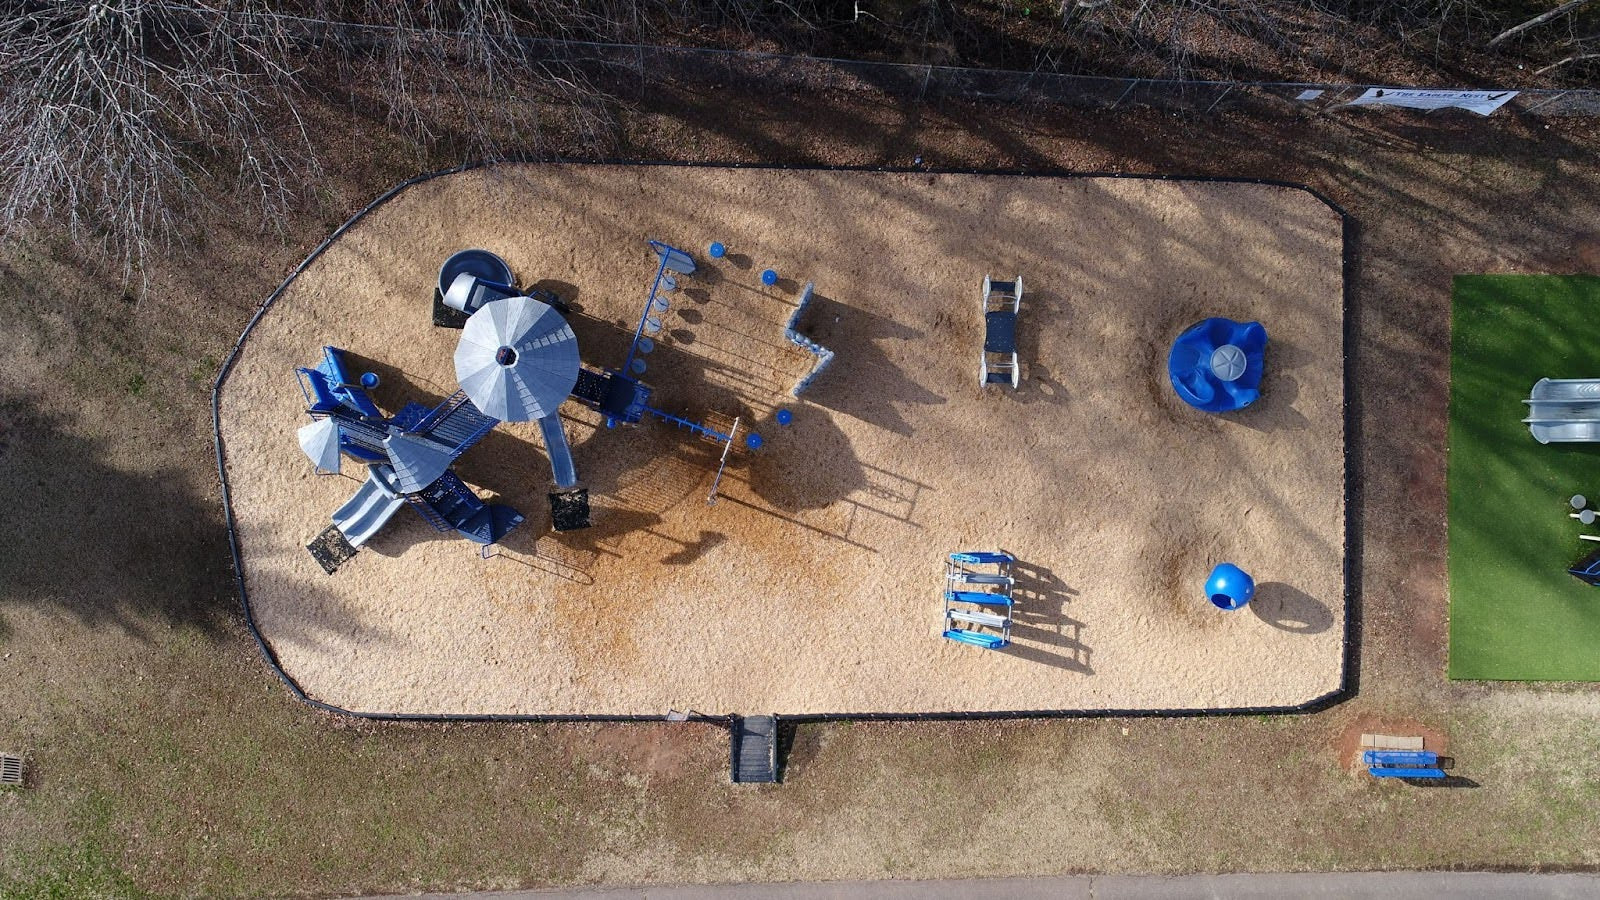 Aerial view of outdoor children’s playground with slides and swings on a sandy surface